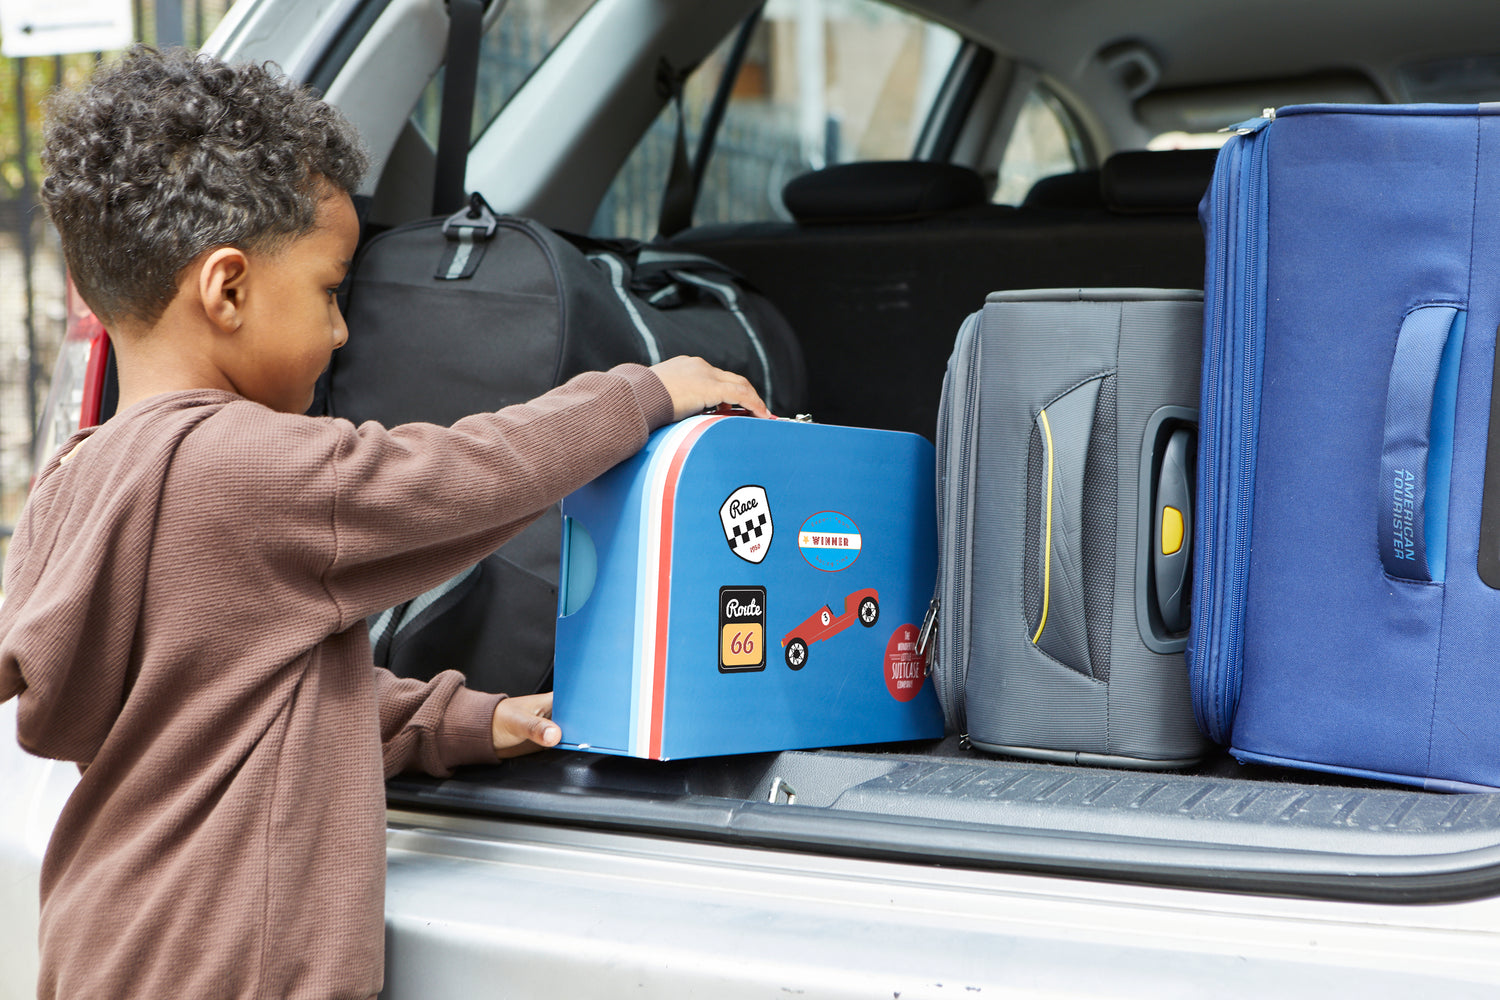 The wonderful little suitcase company presents educational toy suitcases made of sustainable materials. Learning while playing everywhere you go. Easy to fold and pack for travelling in a car, an aeroplane, a train or on a boat. Supports child development